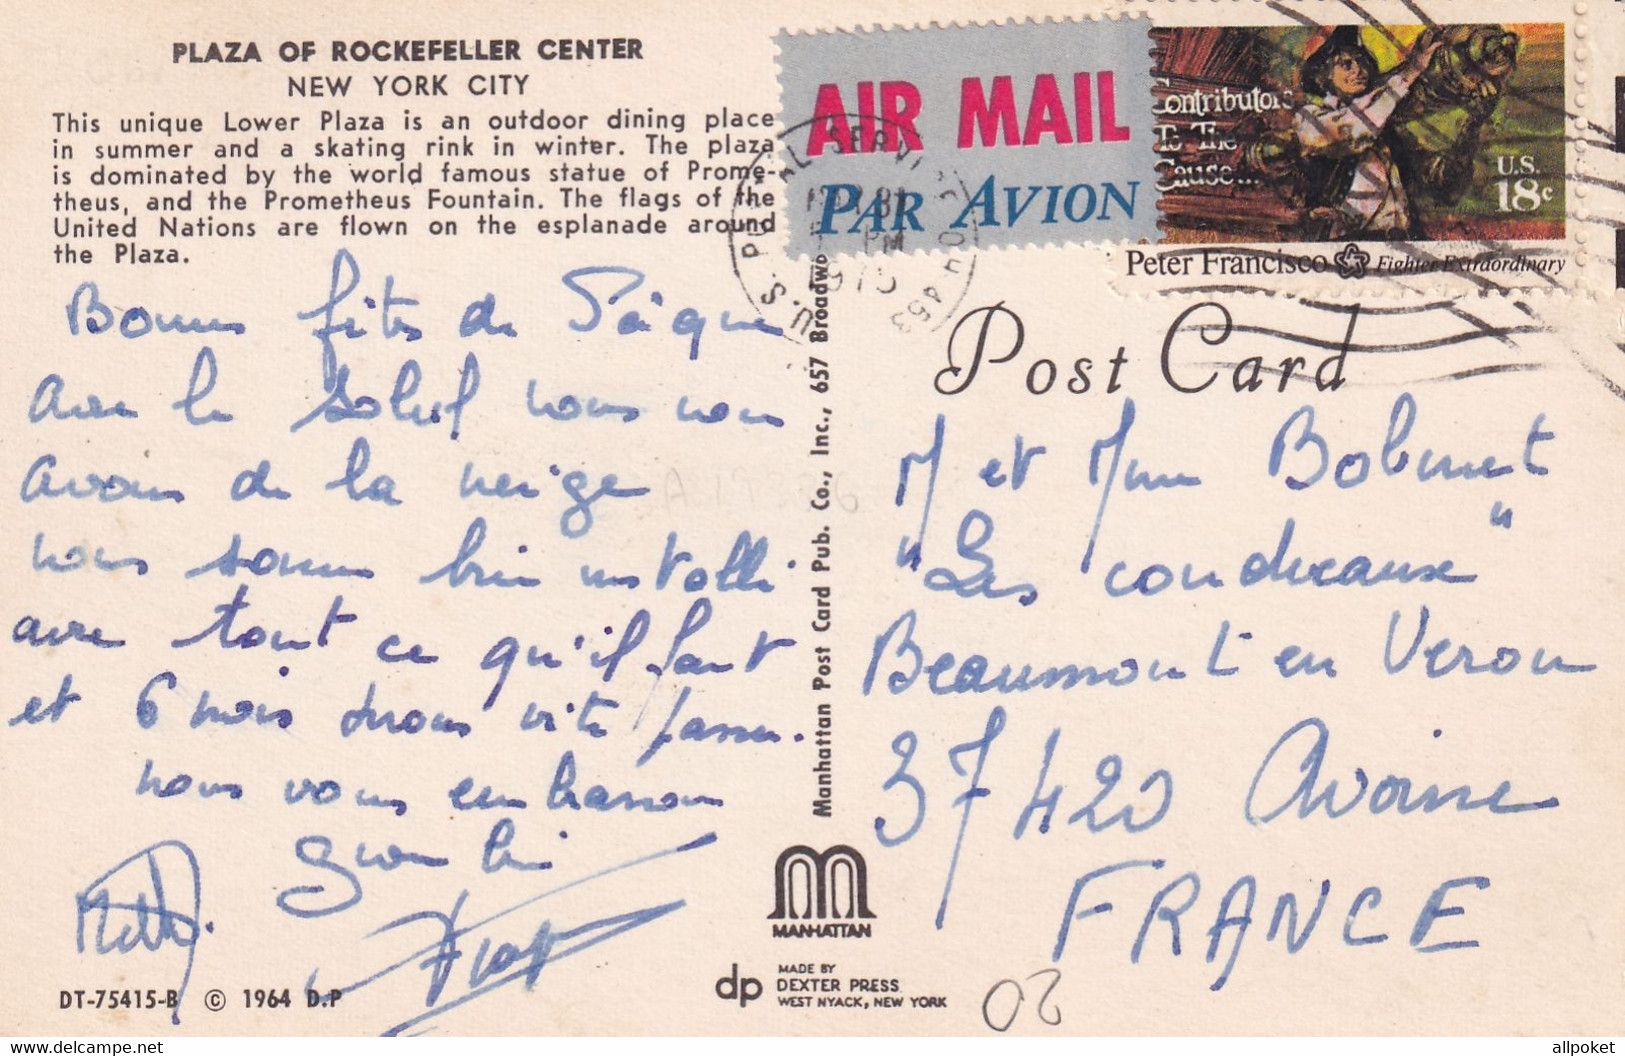 A13219- PLAZA OF ROCKEFELLER CENTER NEW YORK CITY, LOWER PLAZA AIR MAIL 1975 USA USED STAMP 1975 POSTCARD - Tarjetas Panorámicas